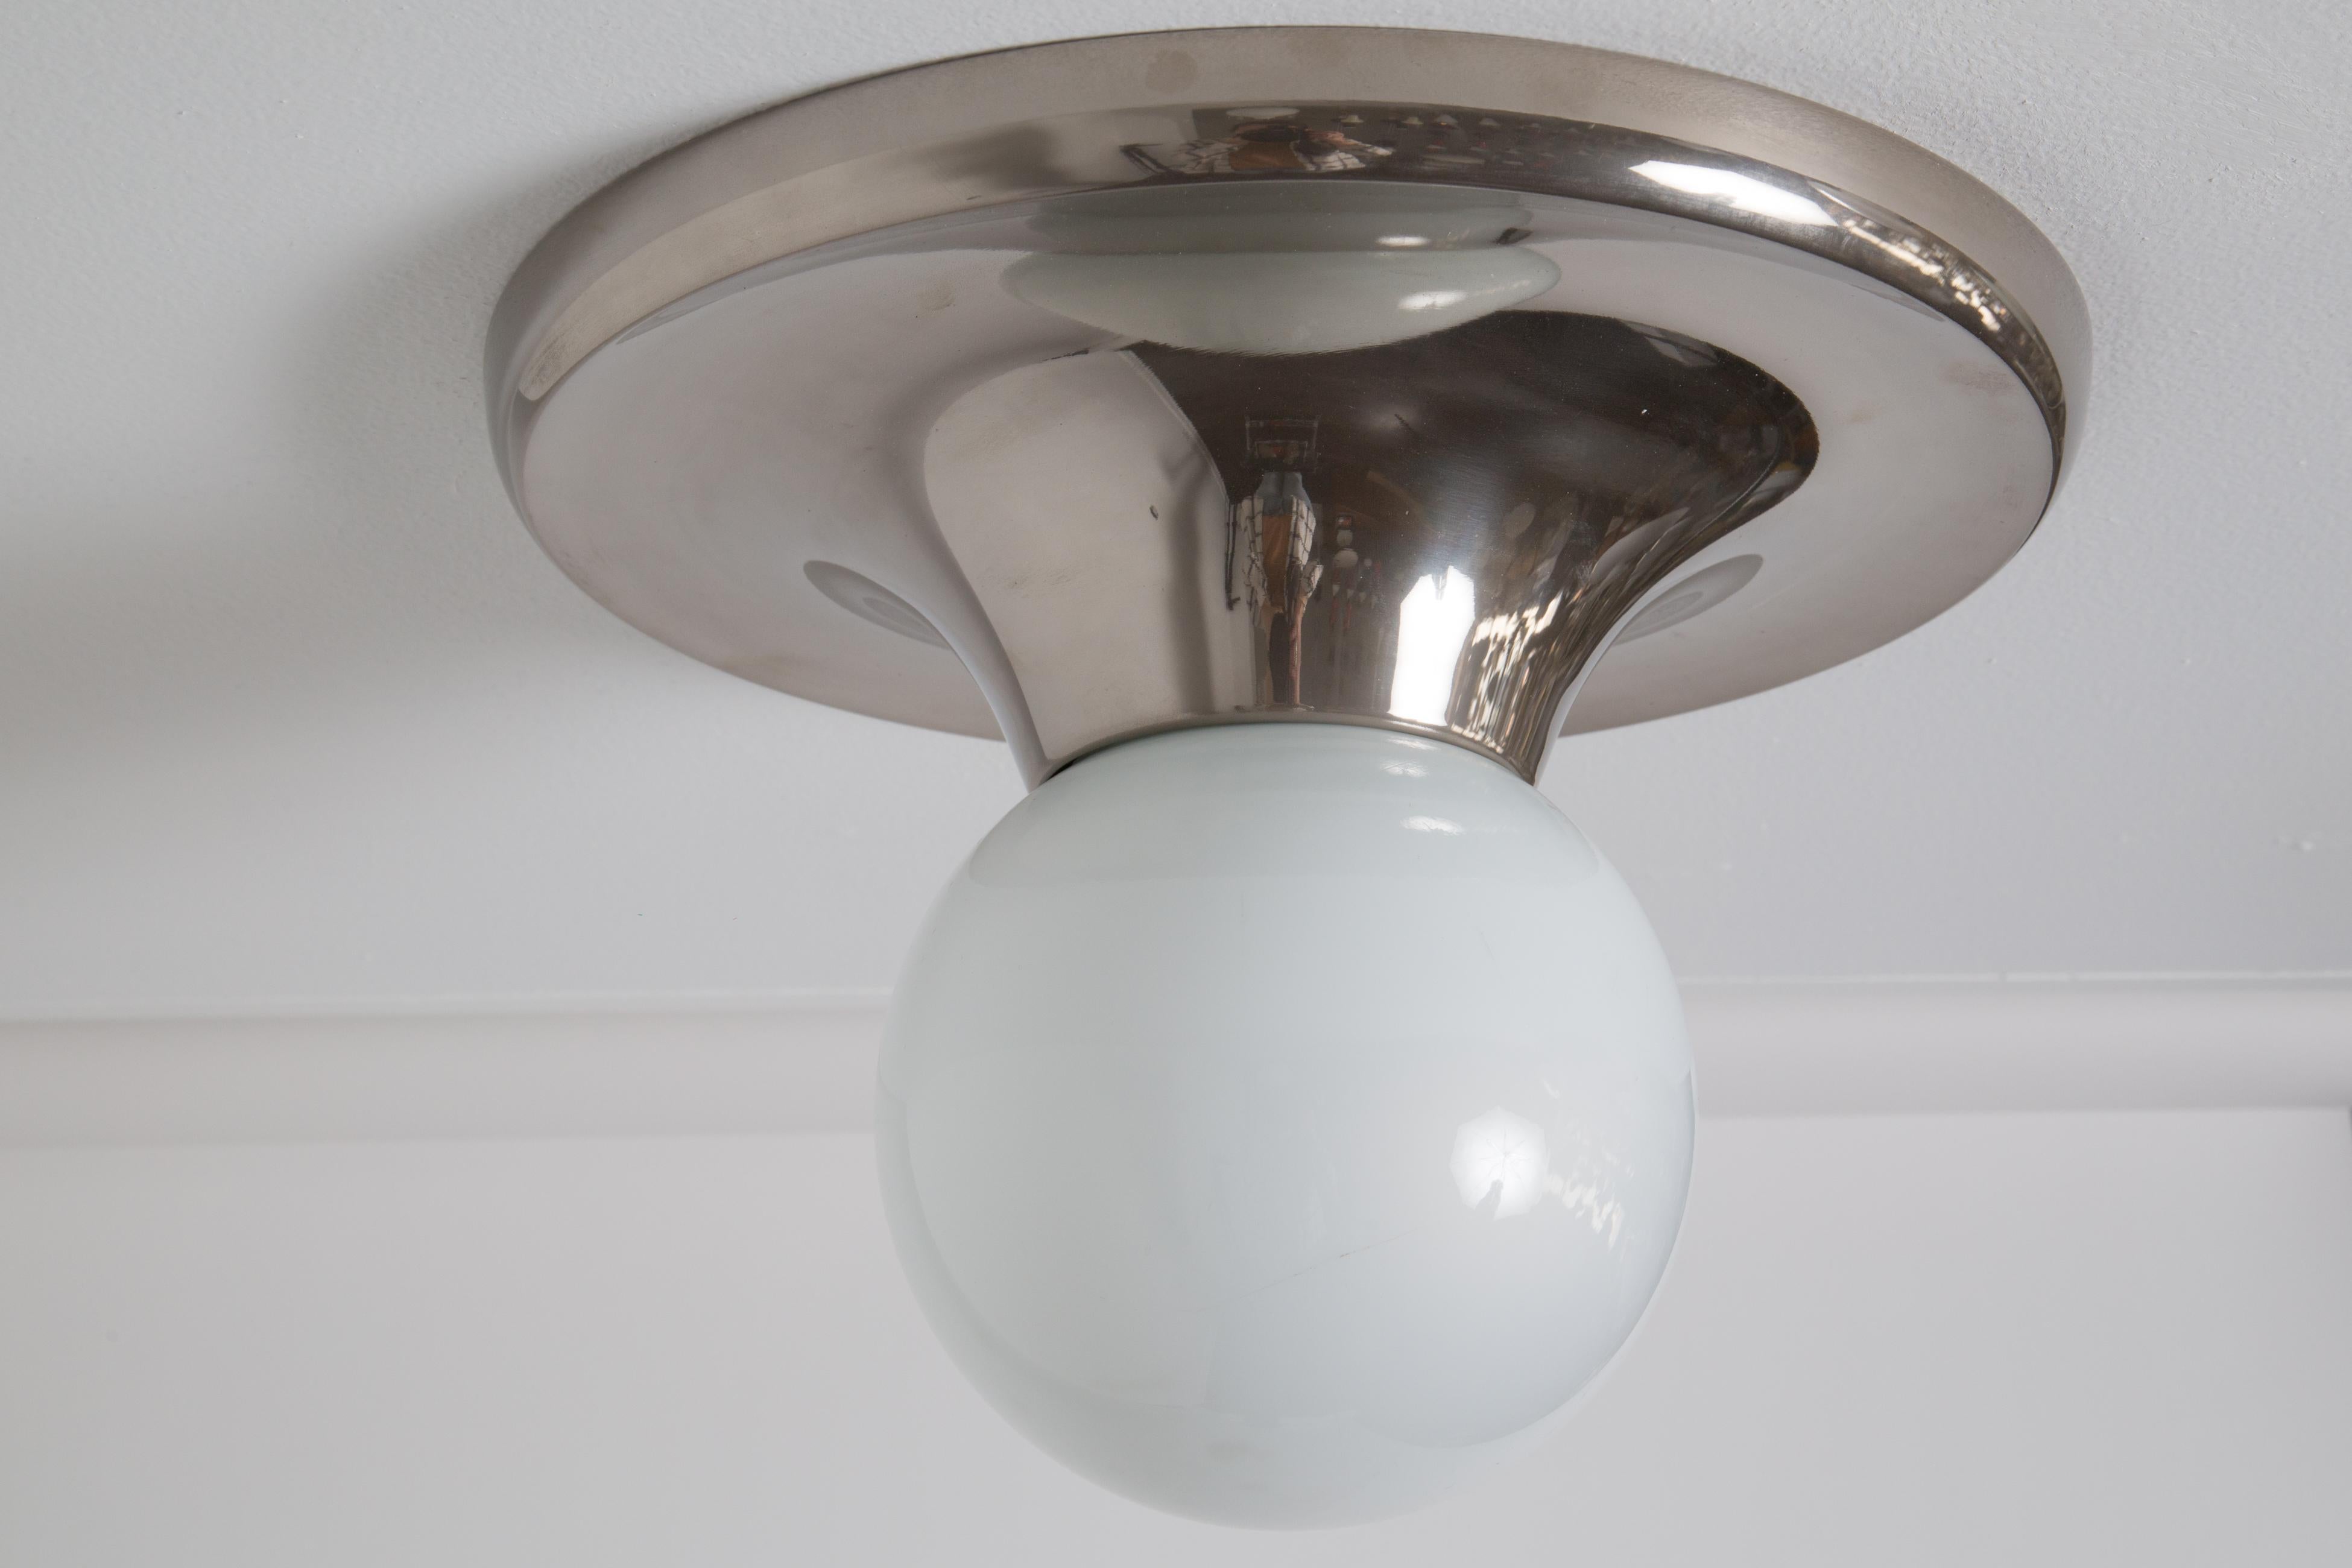 1960s Achille Castiglioni Nickel 'Light Ball' wall or ceiling lamp for Flos. Designed in 1965, this rare and vintage nickel plated brass variant comes with satin opaque glass. An incredibly refined and iconic midcentury design that is